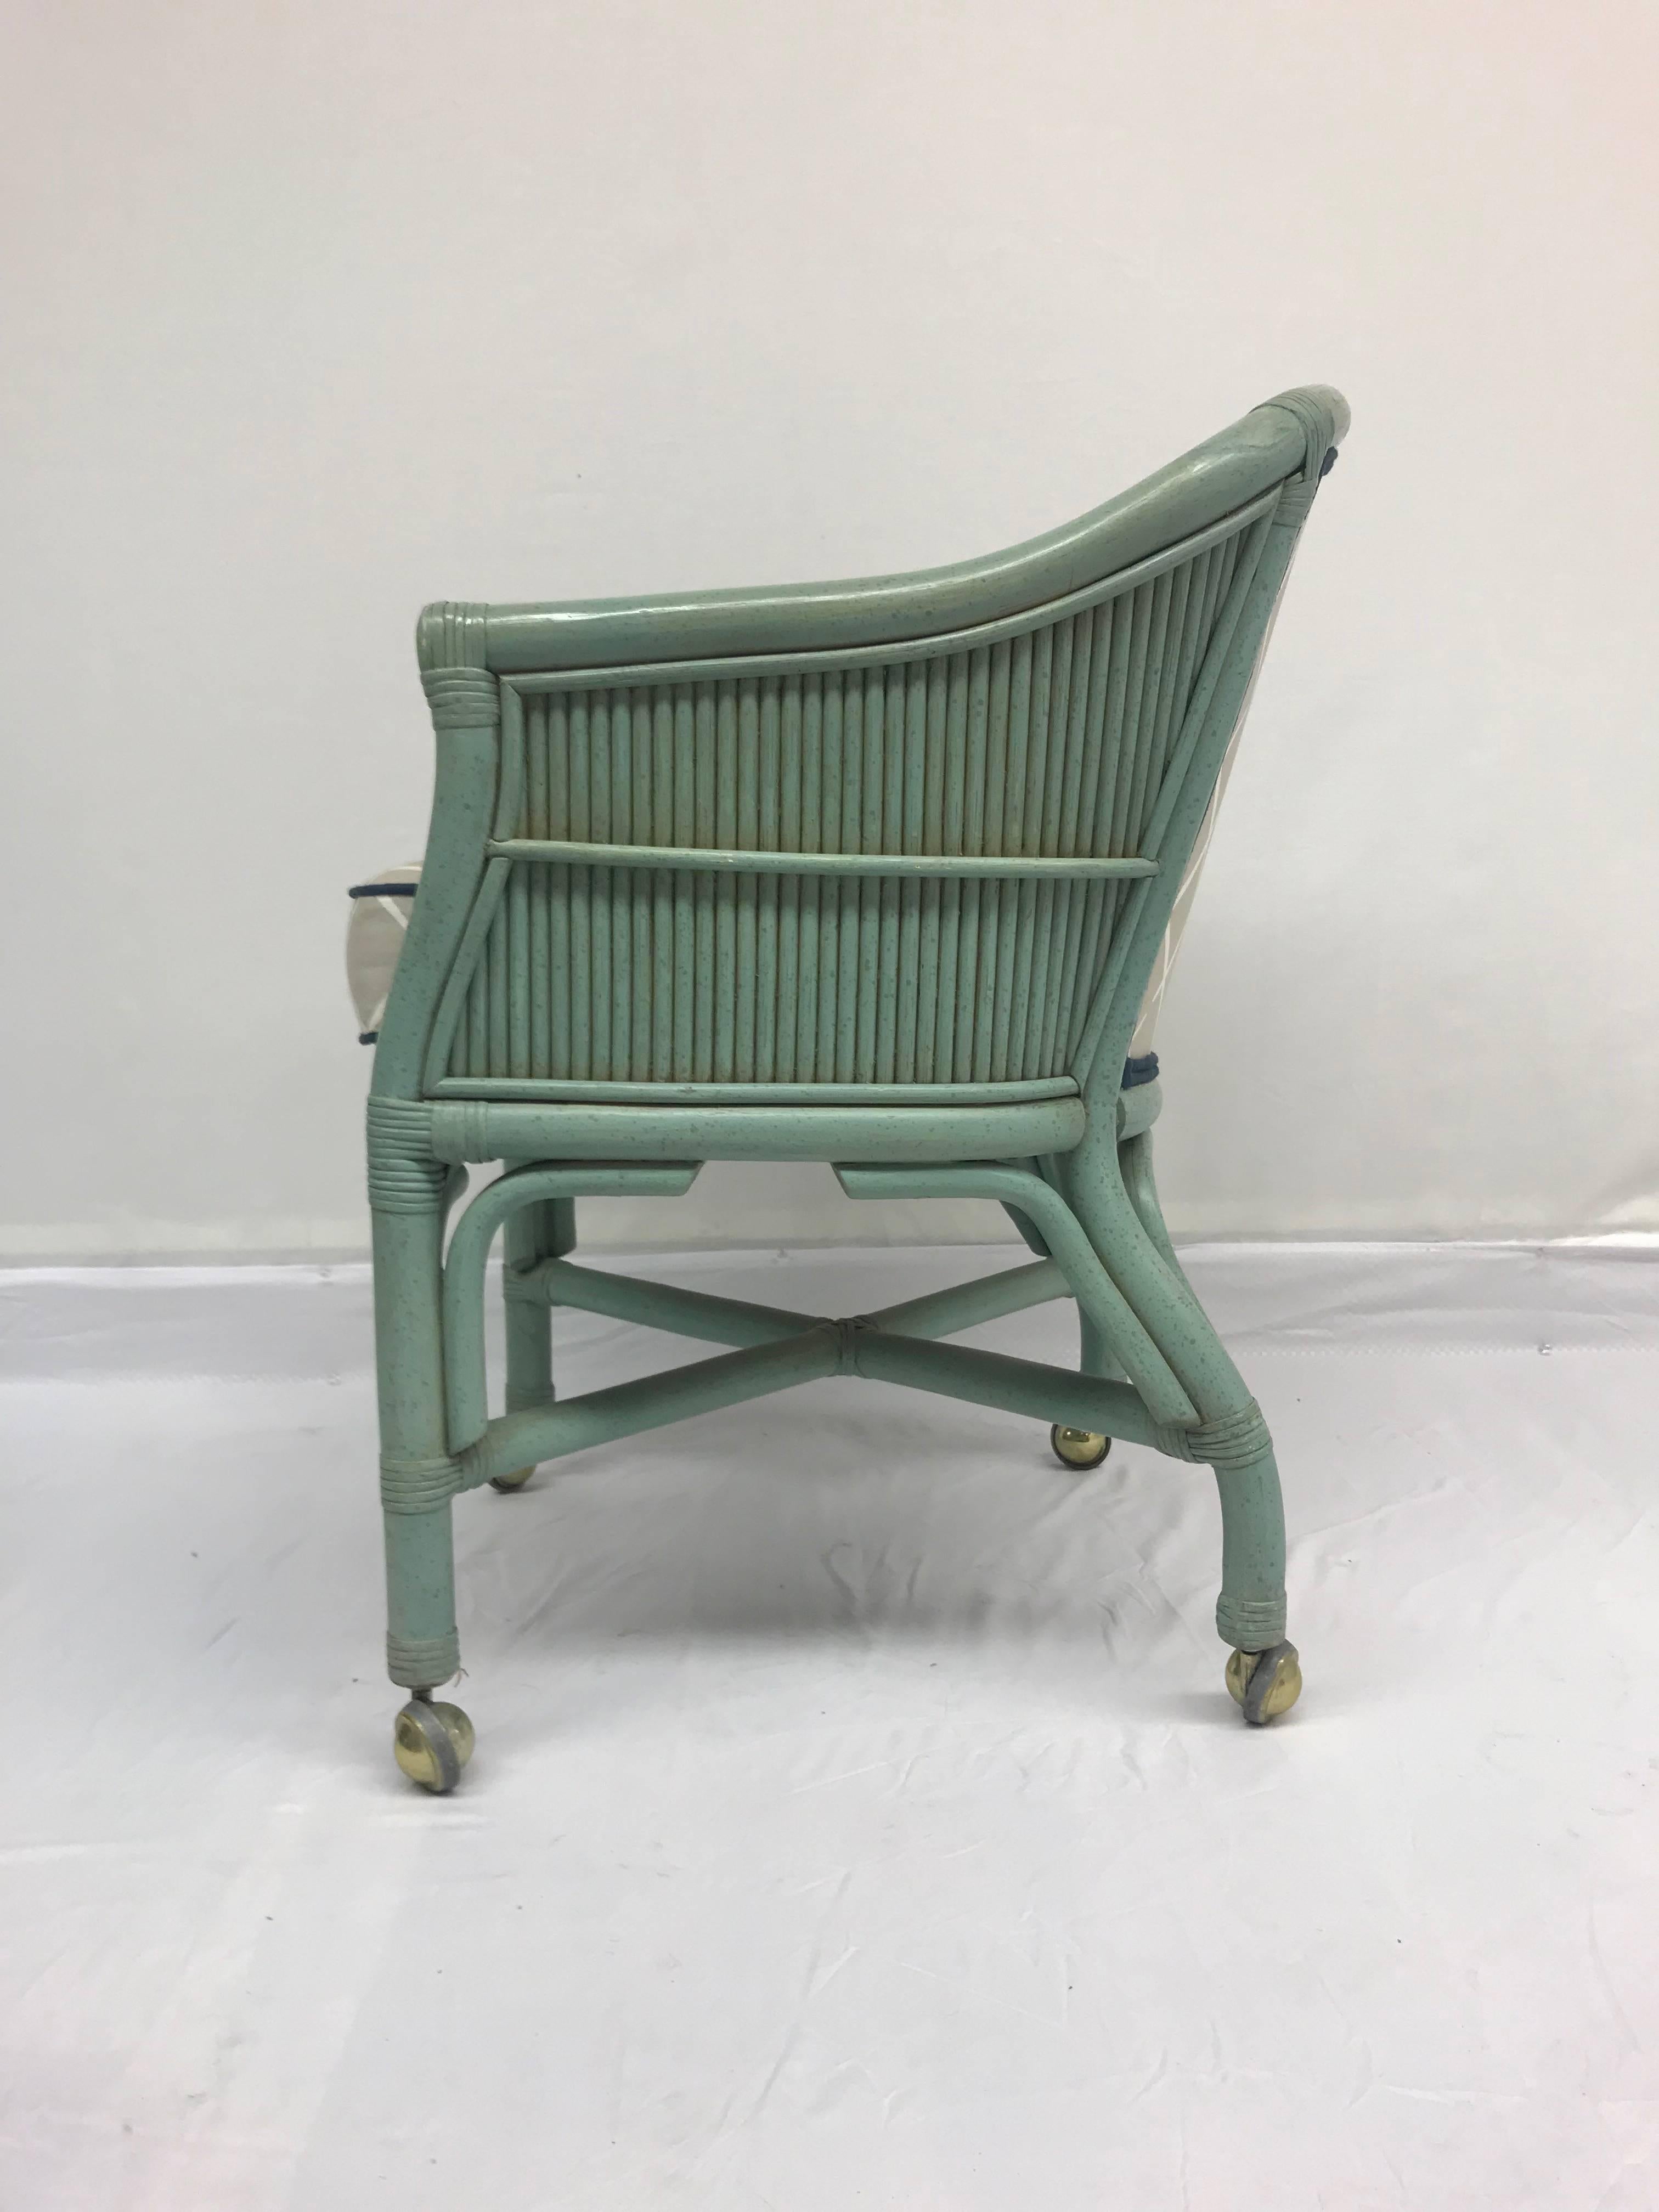 American Vintage Seafoam Blue Rattan Chairs With Casters - Set of 4 For Sale